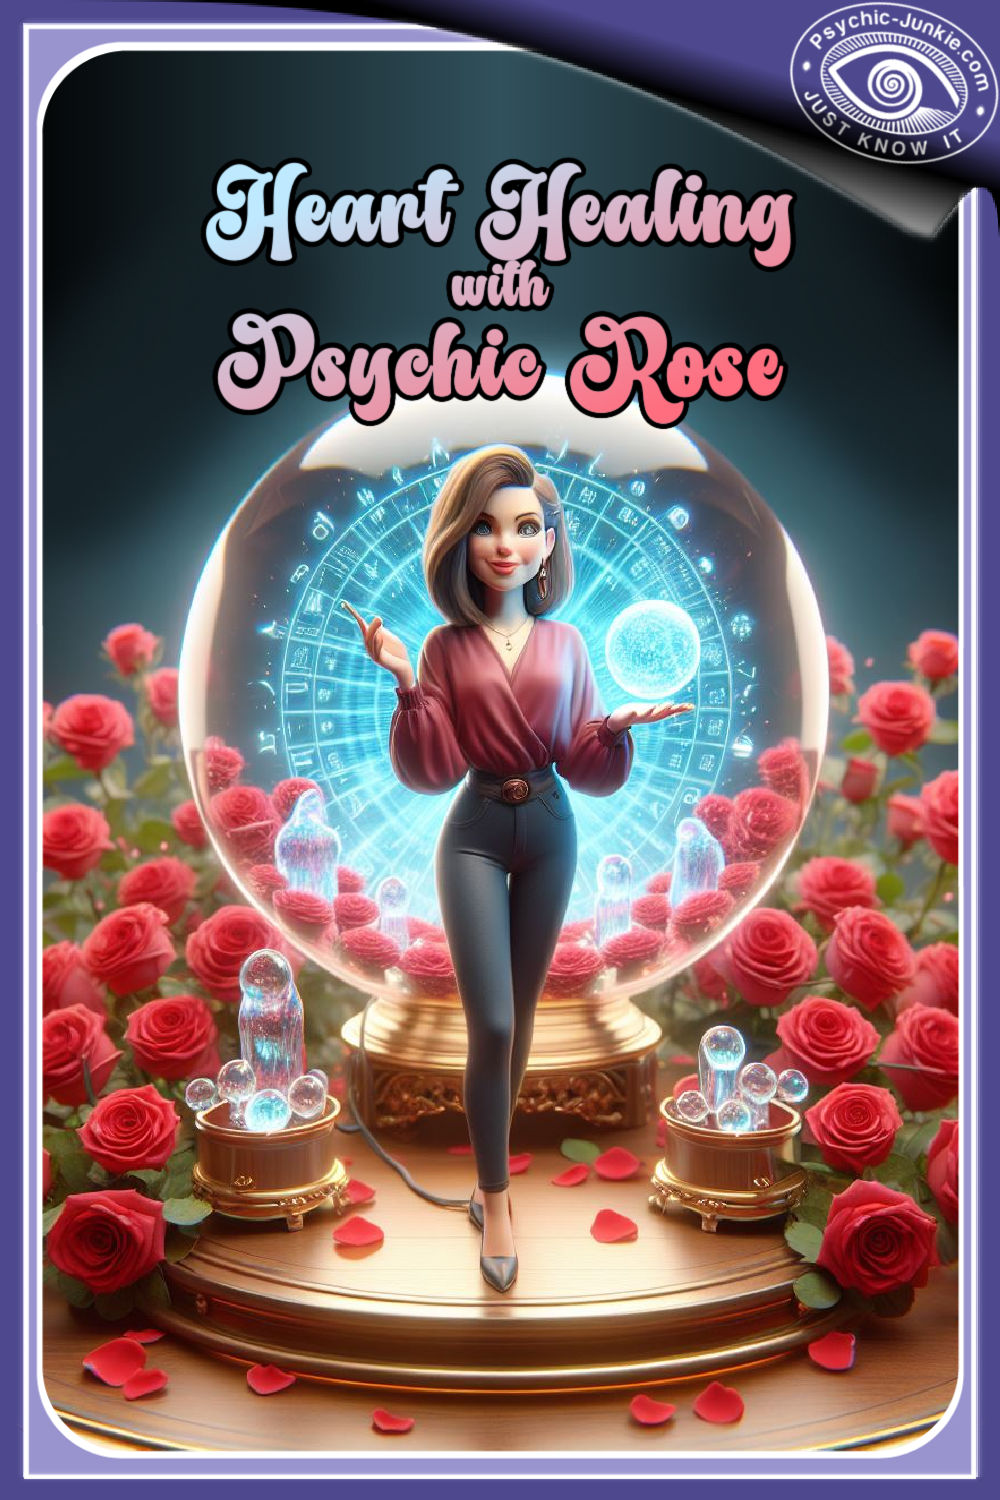 Heart Healing with Psychic Rose